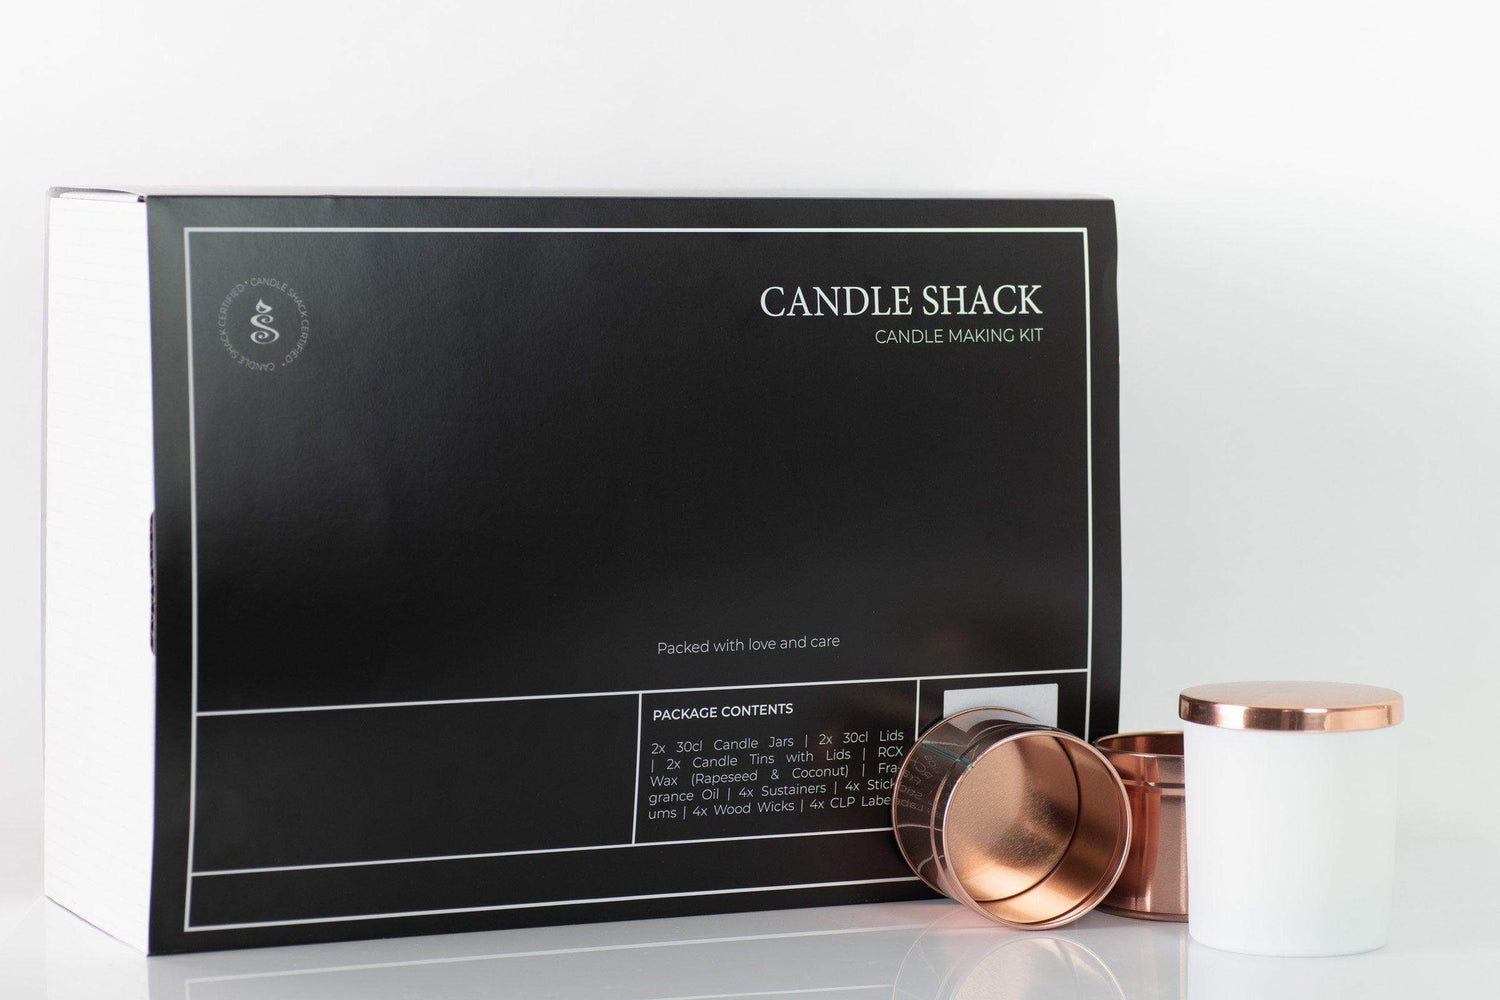 Candle Shack Candle Making Kit Mint, Ginger & Tobacco- Candle Making Kit